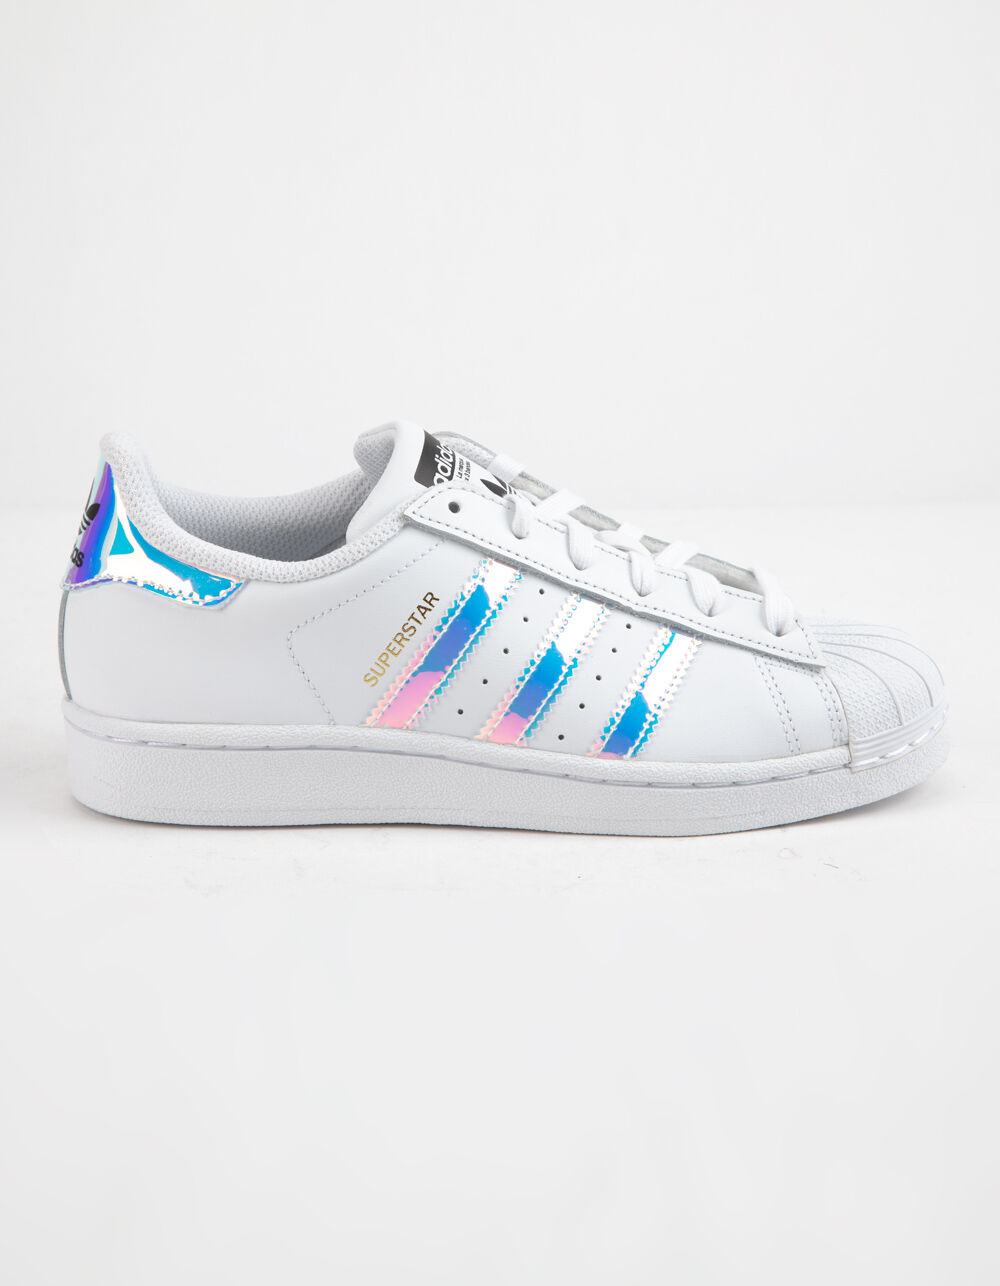 Nuclear Plausible robo ADIDAS Superstar White & Metallic Silver Girls Shoes - WHITE/METALLIC SILVER  | Tillys